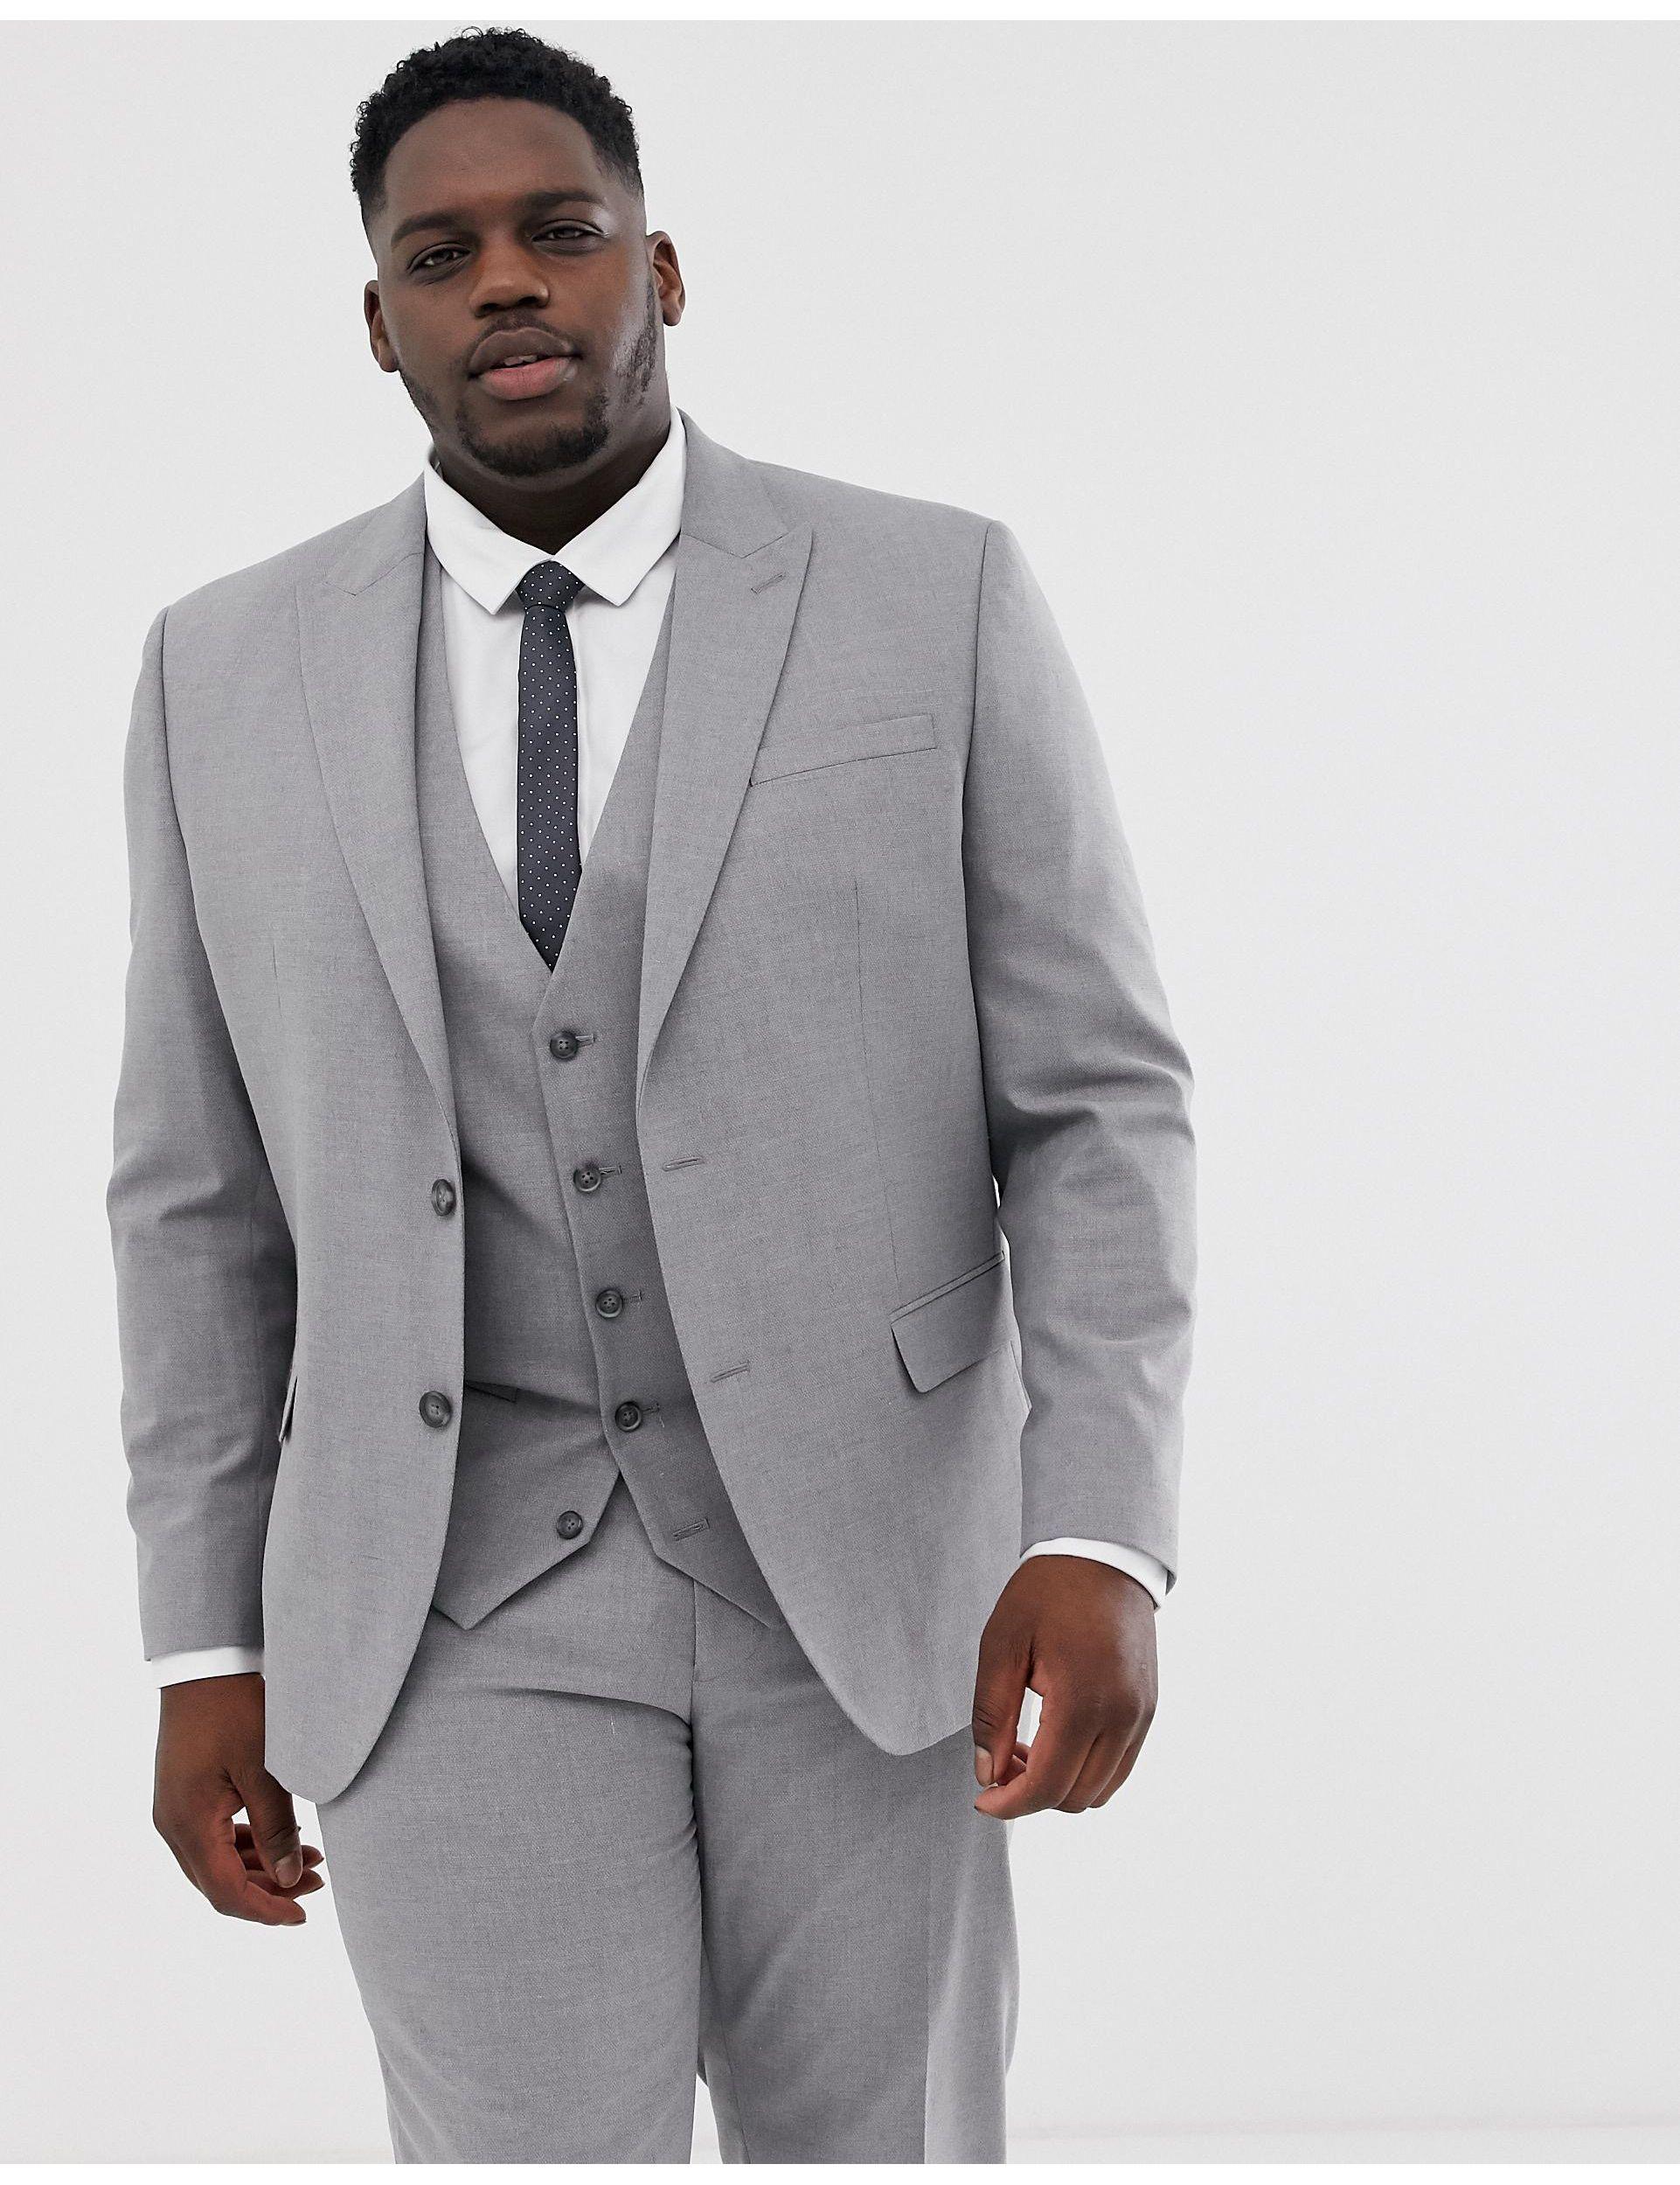 river island wedding suits for Sale OFF 79%